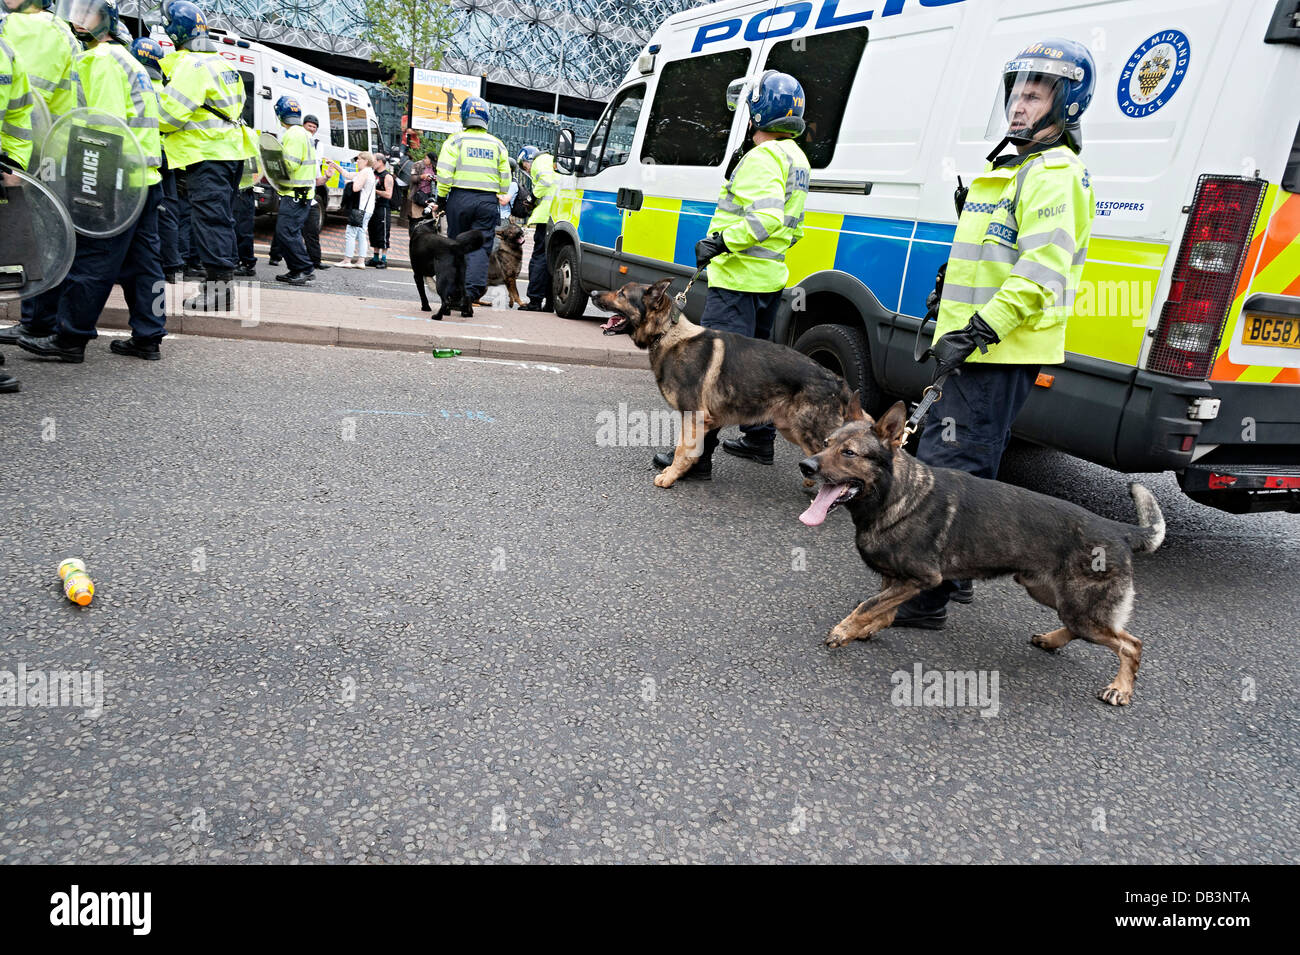 edl protest birmingham july 20th 2013 police dogs being used Stock Photo